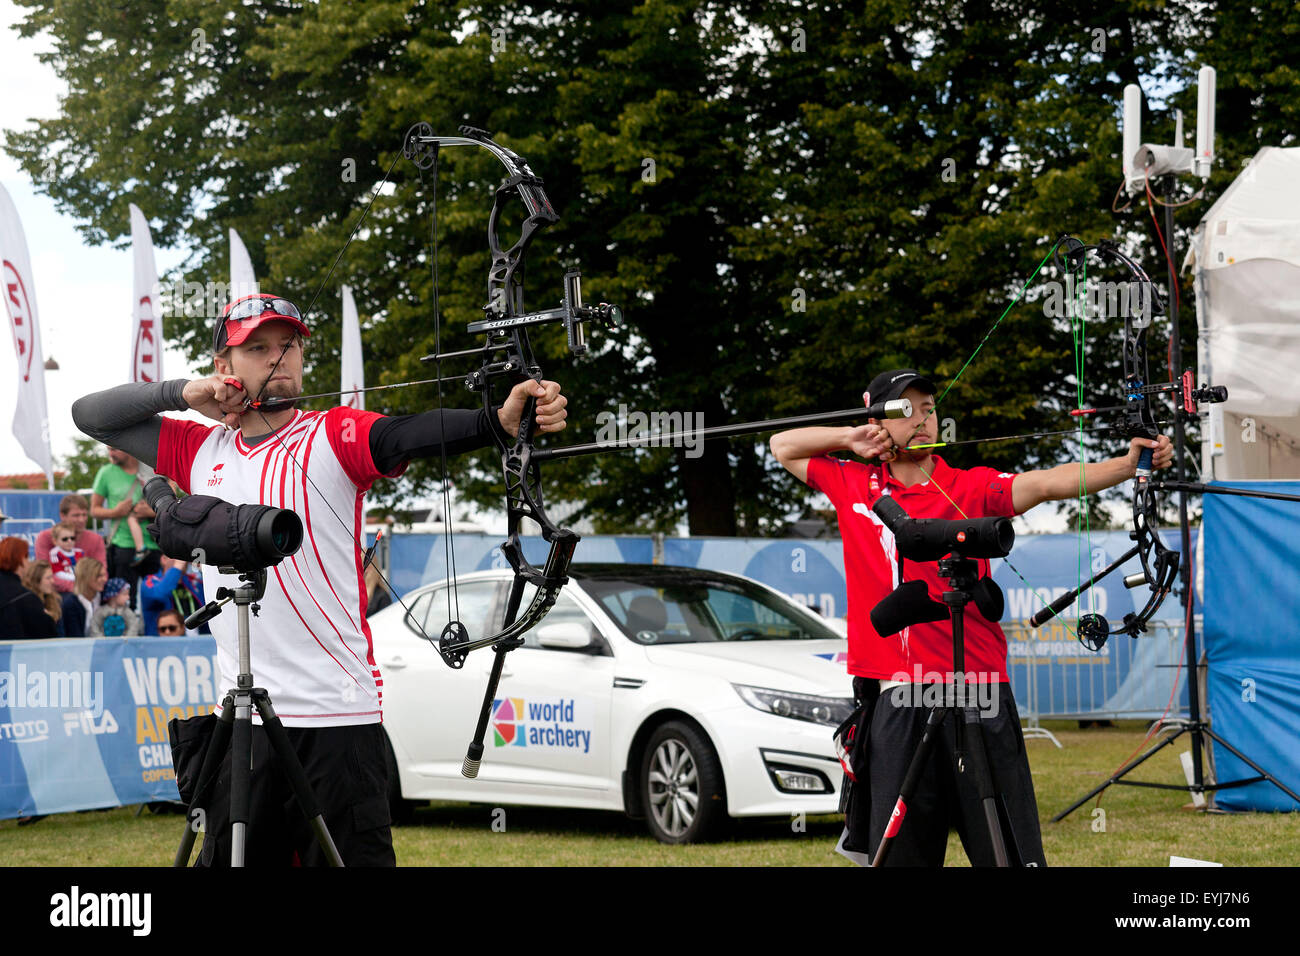 Copenhagen, Denmark, July 30th, 2015: Danish archer Stephan Hansen (R) and Switzerland's Roman Haefelfinger (L)  competes in the World Archery Championships in Copenhagen during Thursday's individual matches  in compound bow. Credit:  OJPHOTOS/Alamy Live News Stock Photo